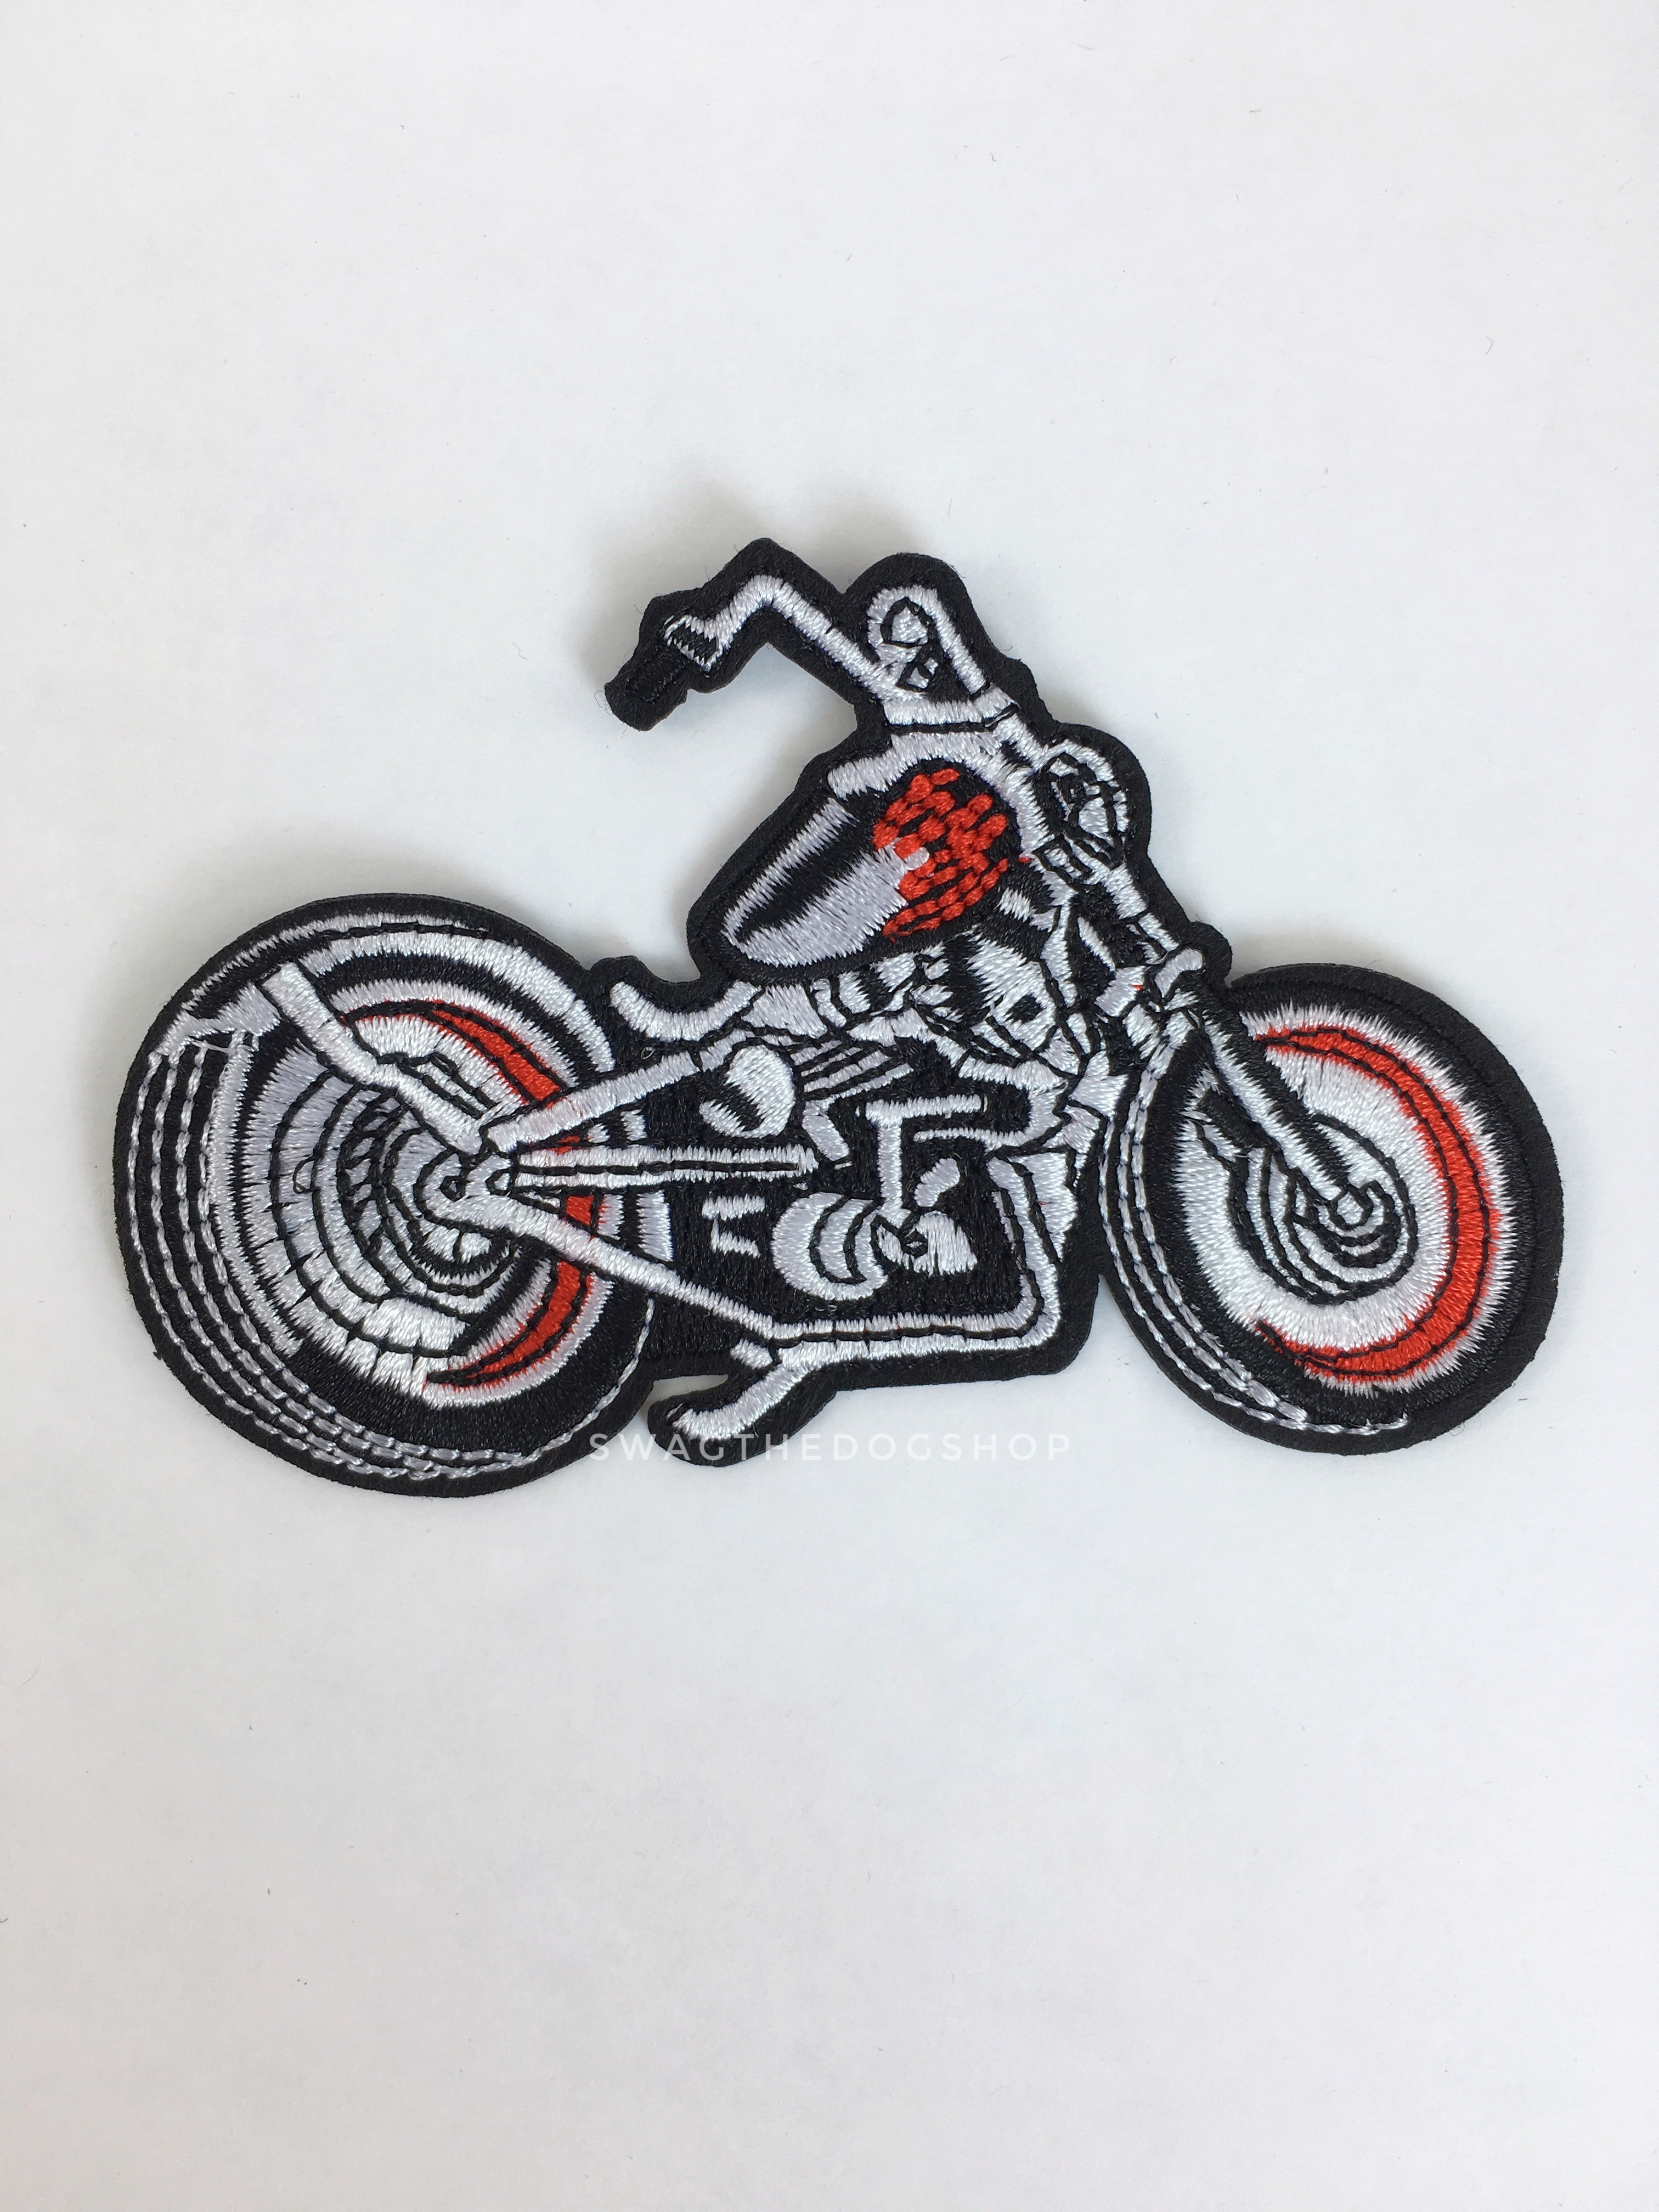 Patch Add-On of Motorcycle. Red and Black Motorcycle Patch